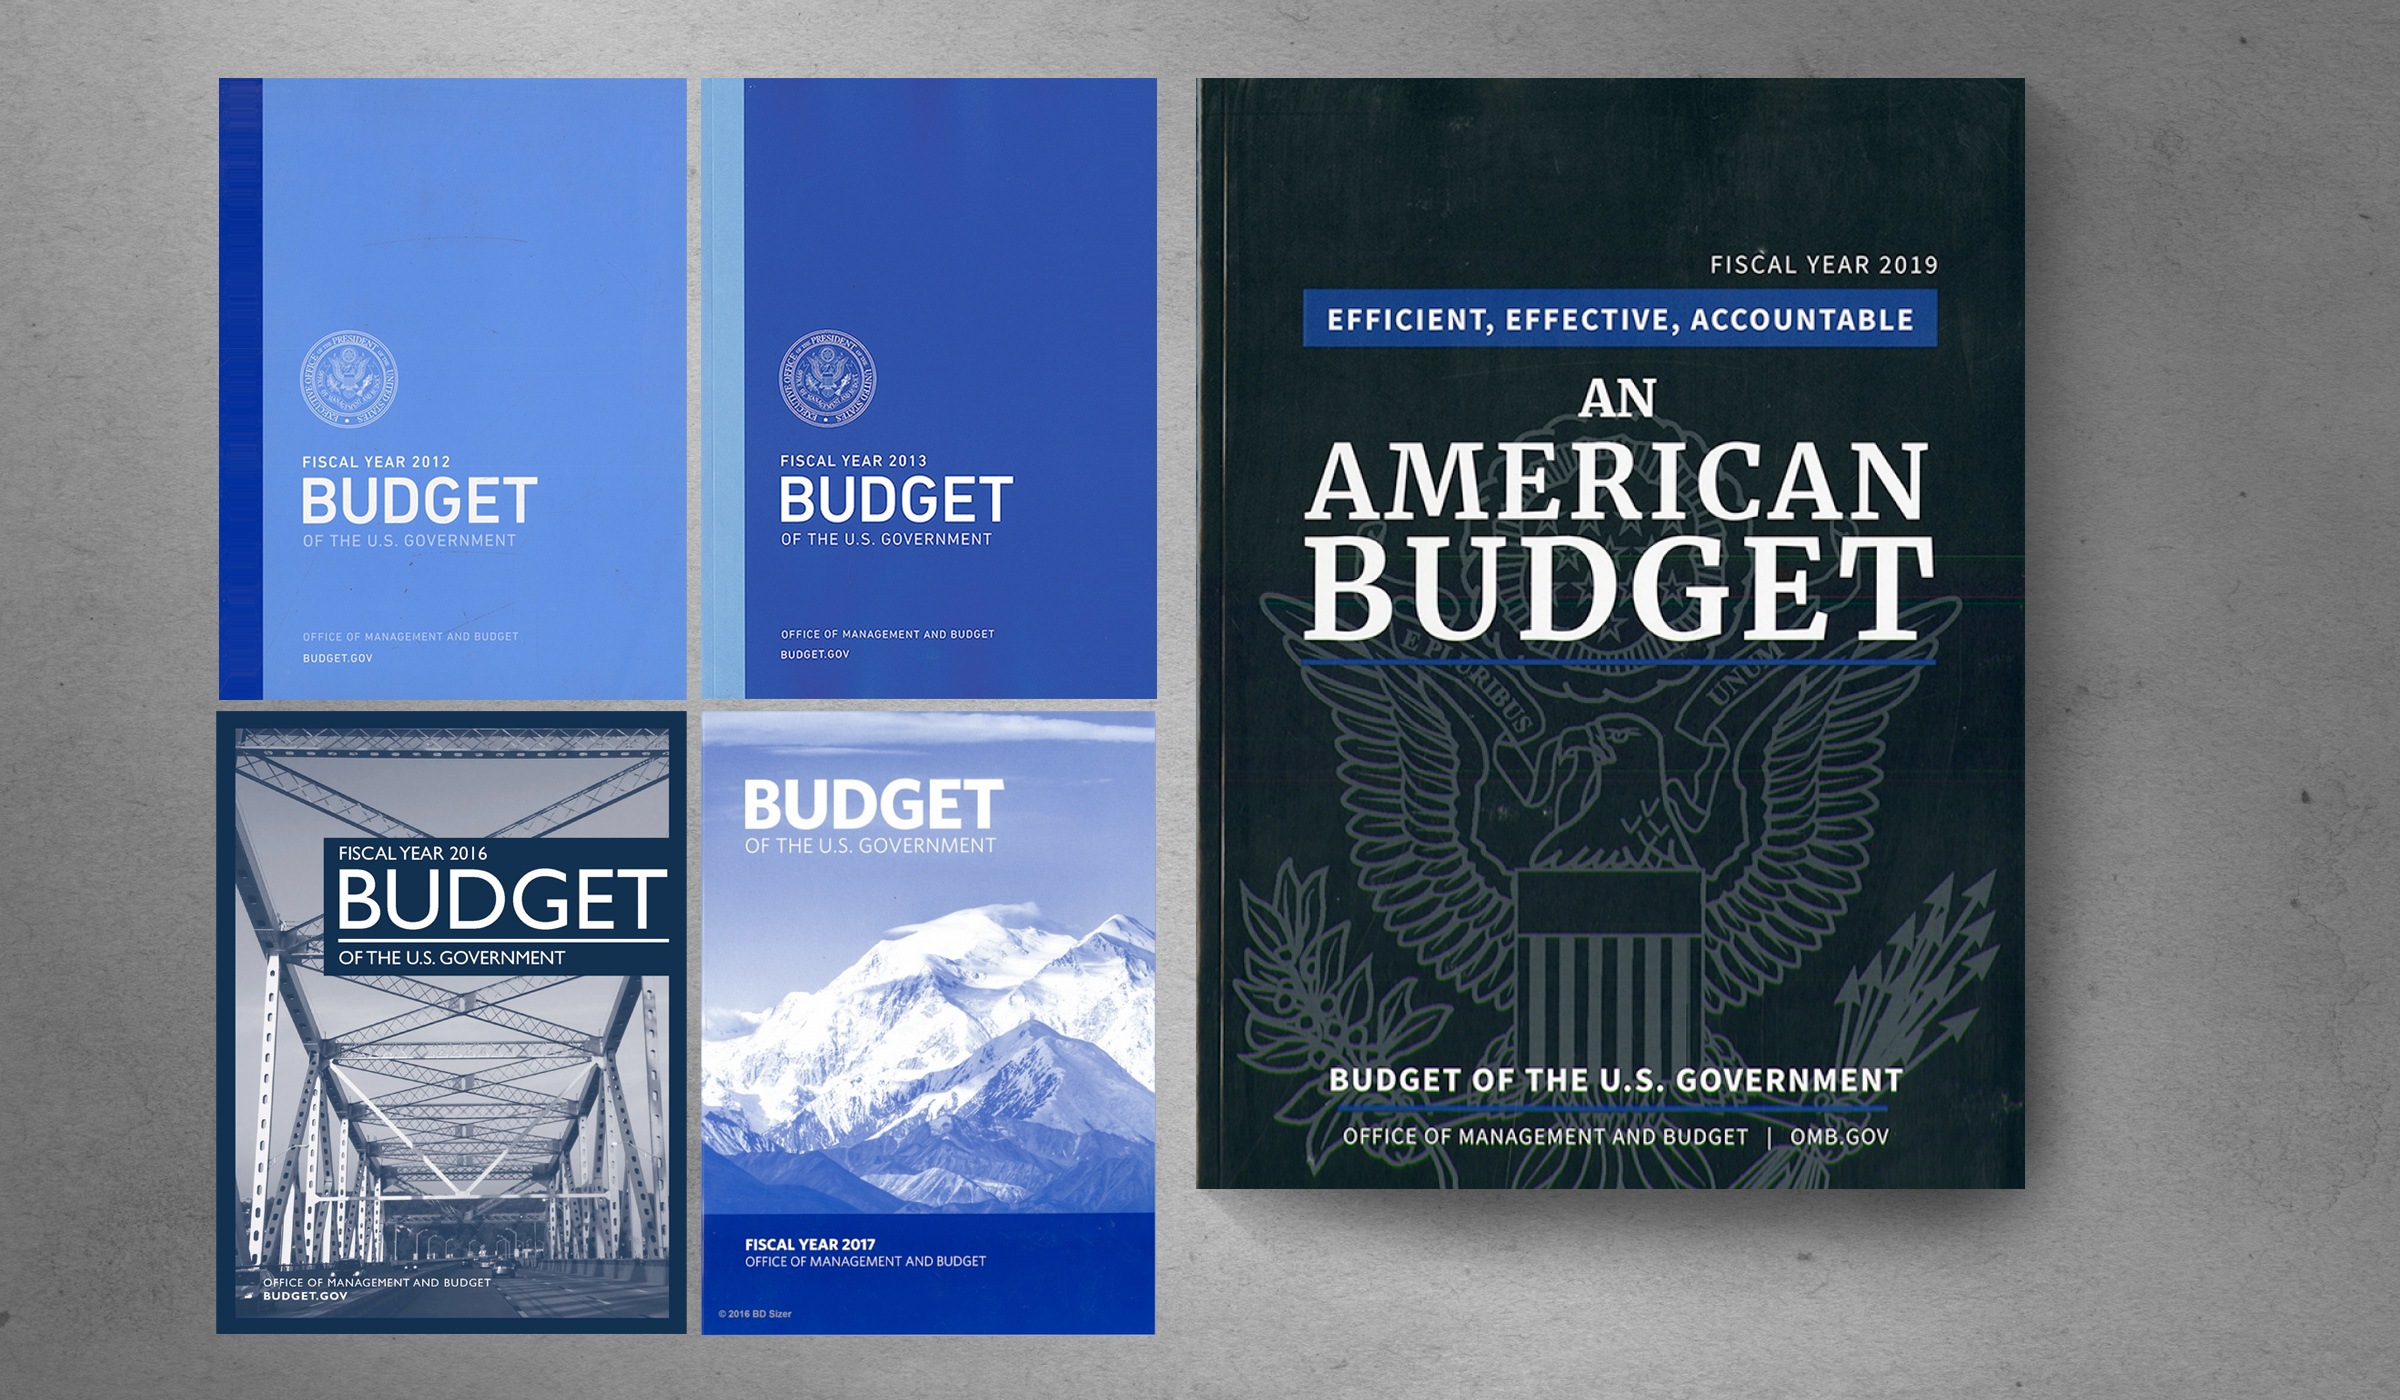 creatief afbetalen Of later Judging a Book by its Cover: The 2019 U.S. Budget – Lee Willett